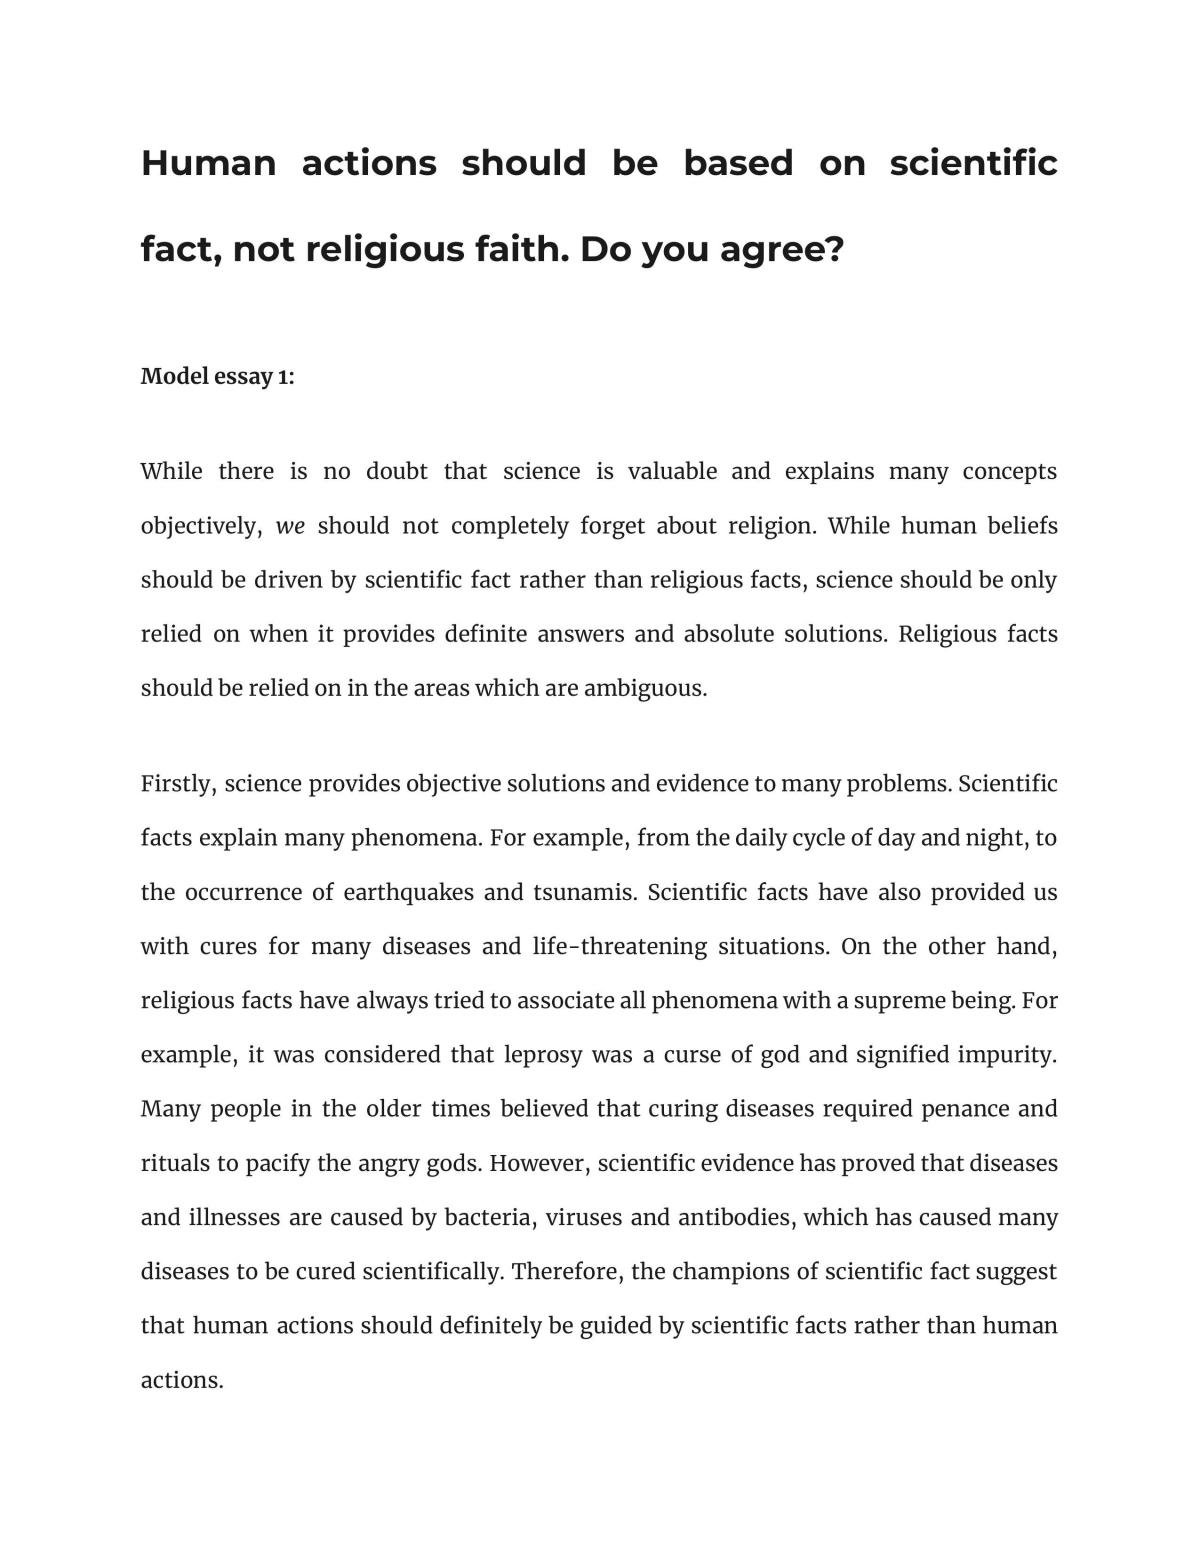 Human actions should be based on science and not faith - Page 1